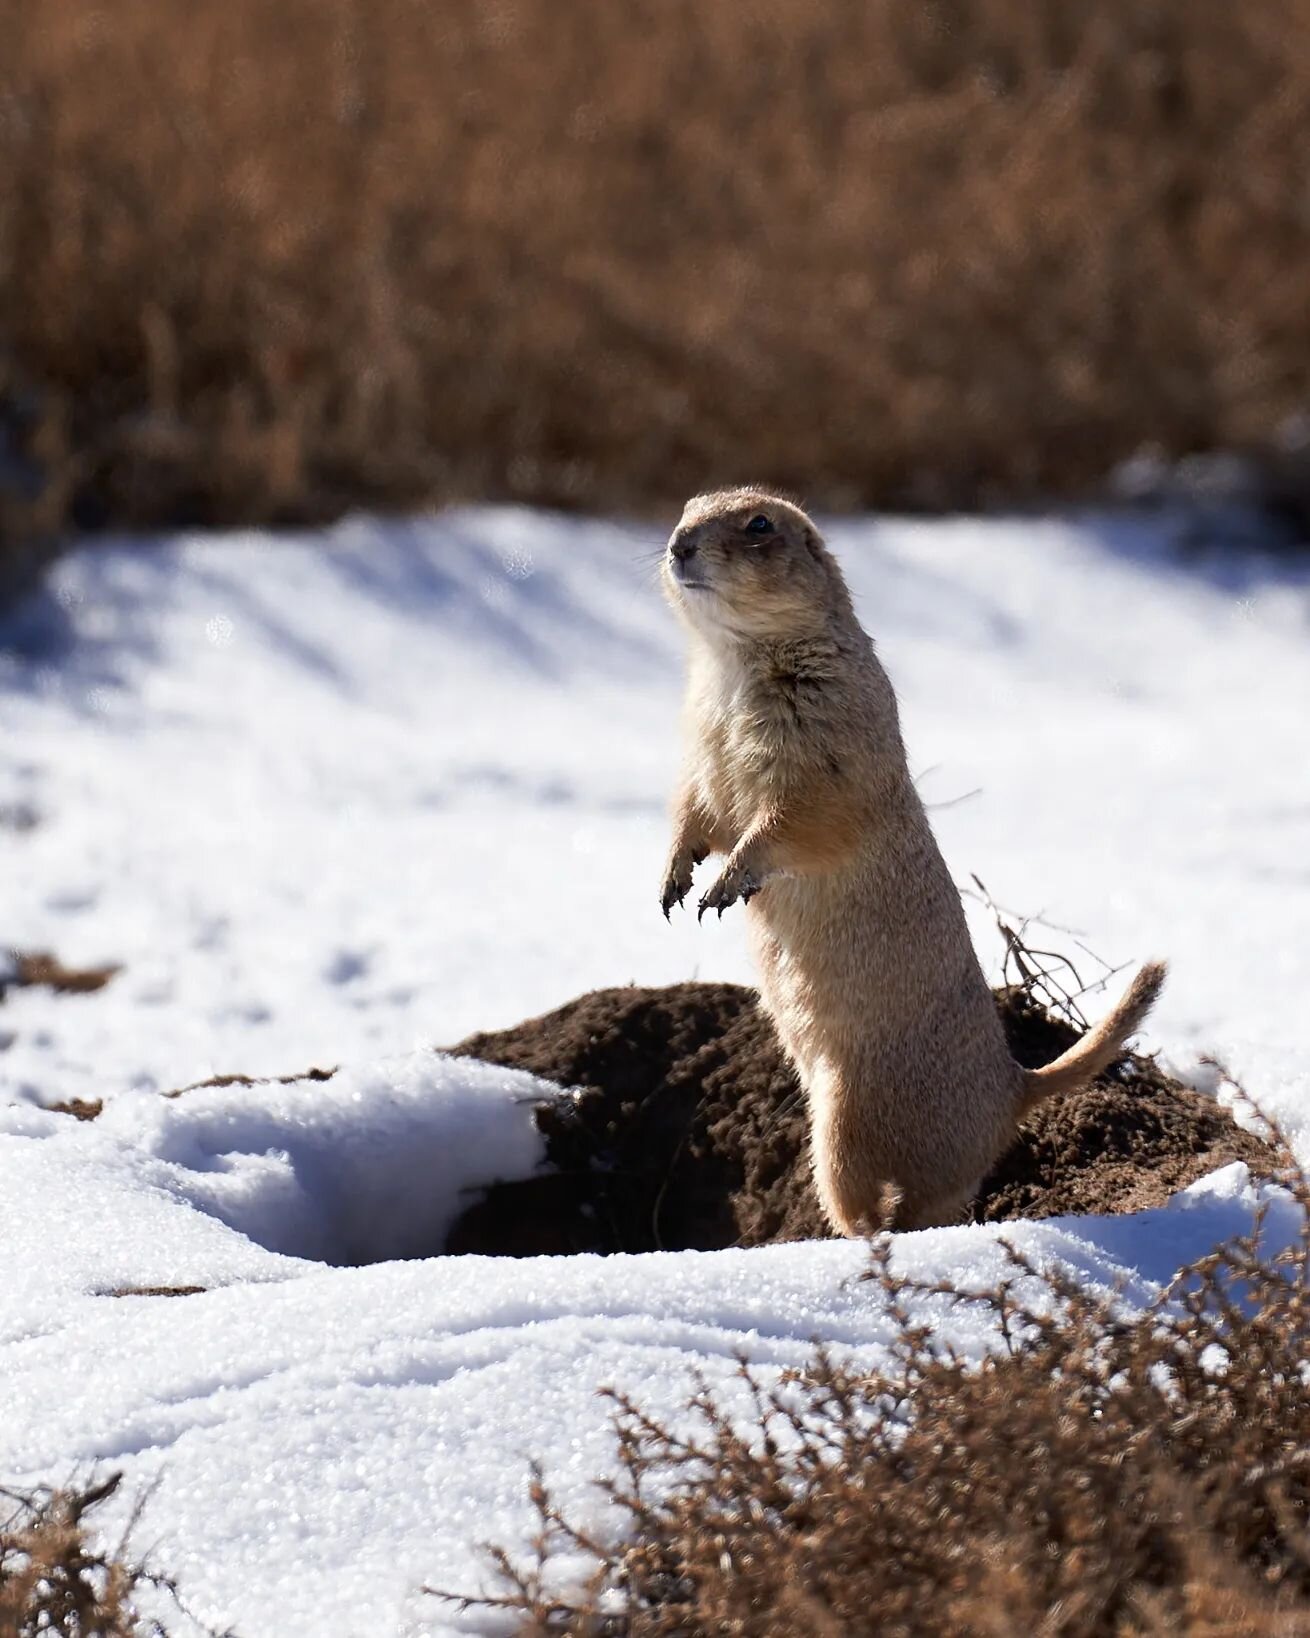 Spring, is that you playa?

Just a Prarie Dog checking out the conditions.

#prairiedog #natgeoyourshot #wildlifephotographer